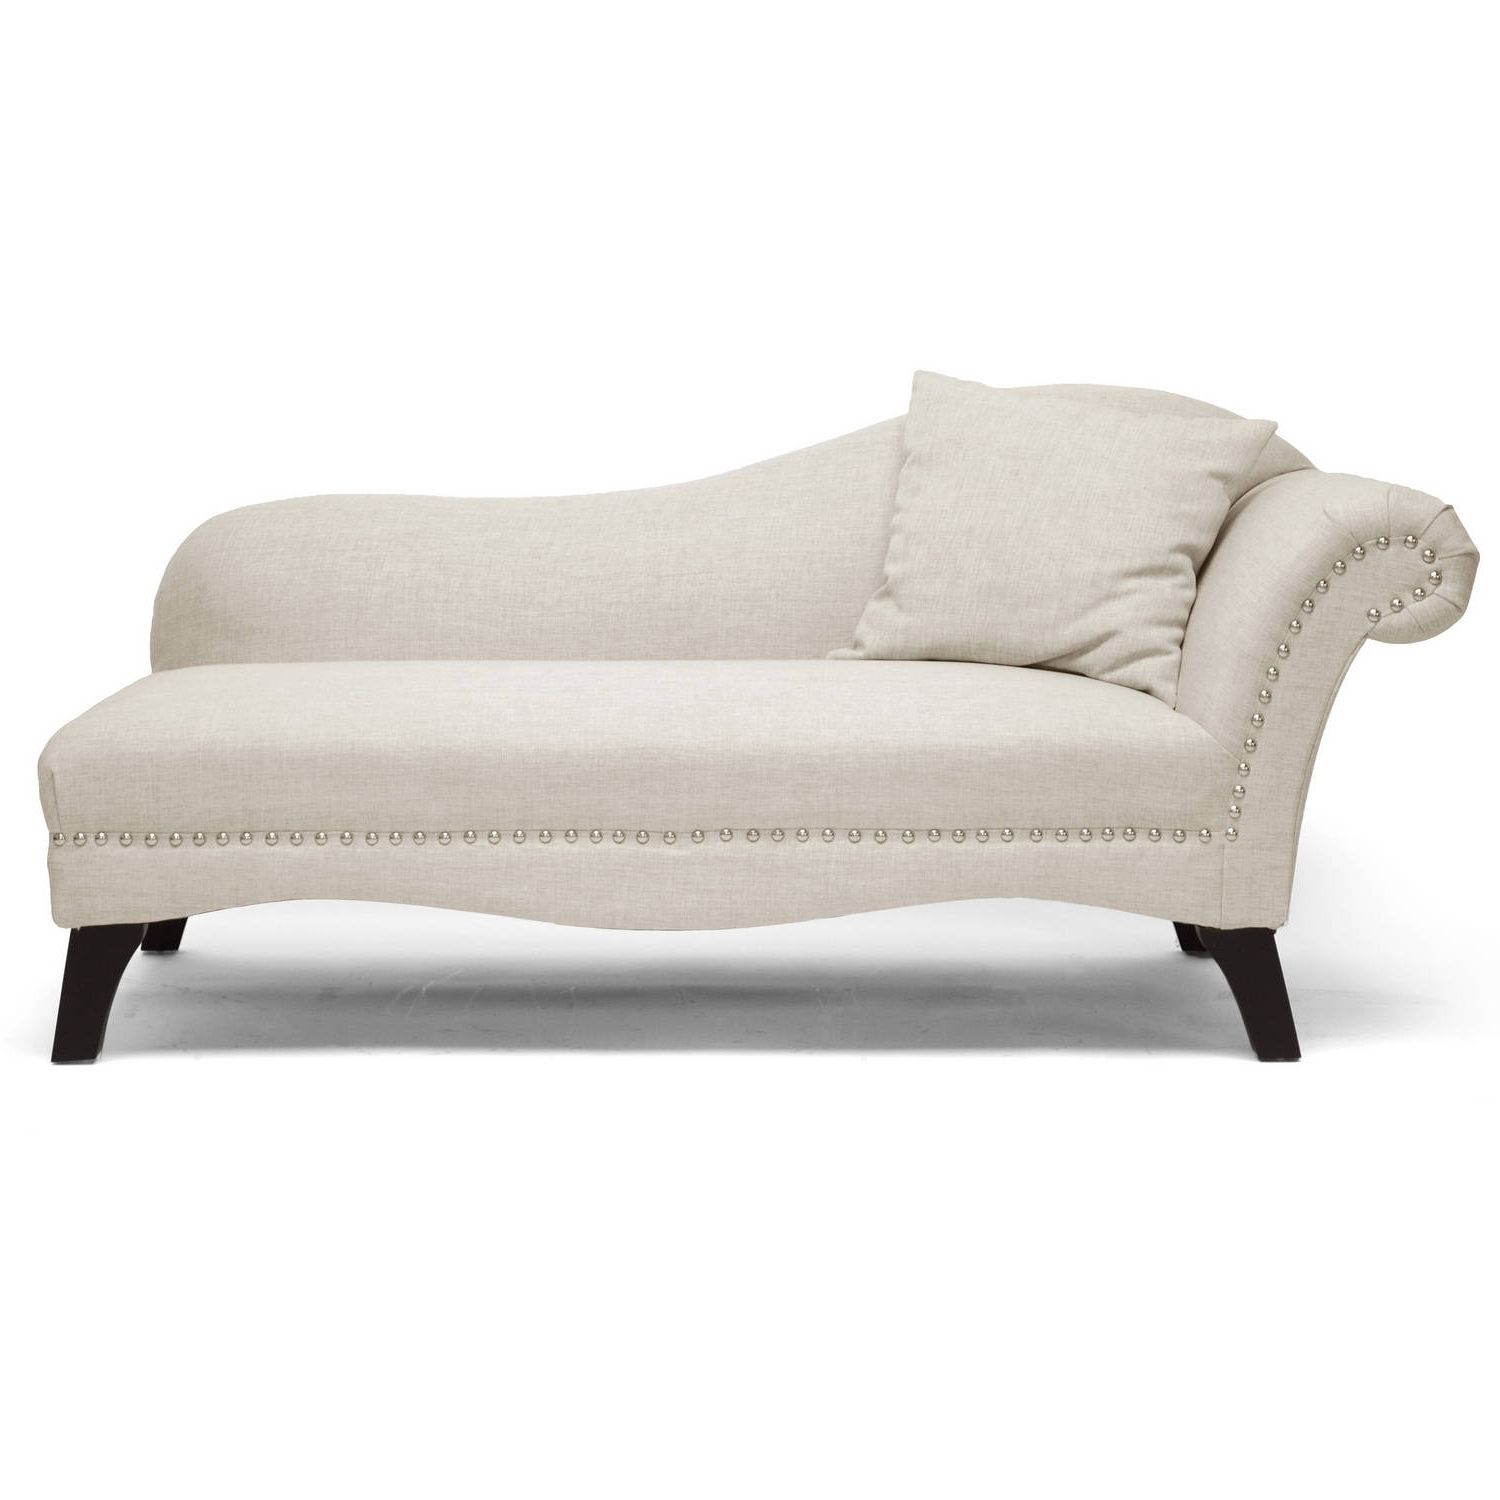 Most Current Chaise Lounges – Walmart With Chaise Lounge Chairs (View 1 of 15)